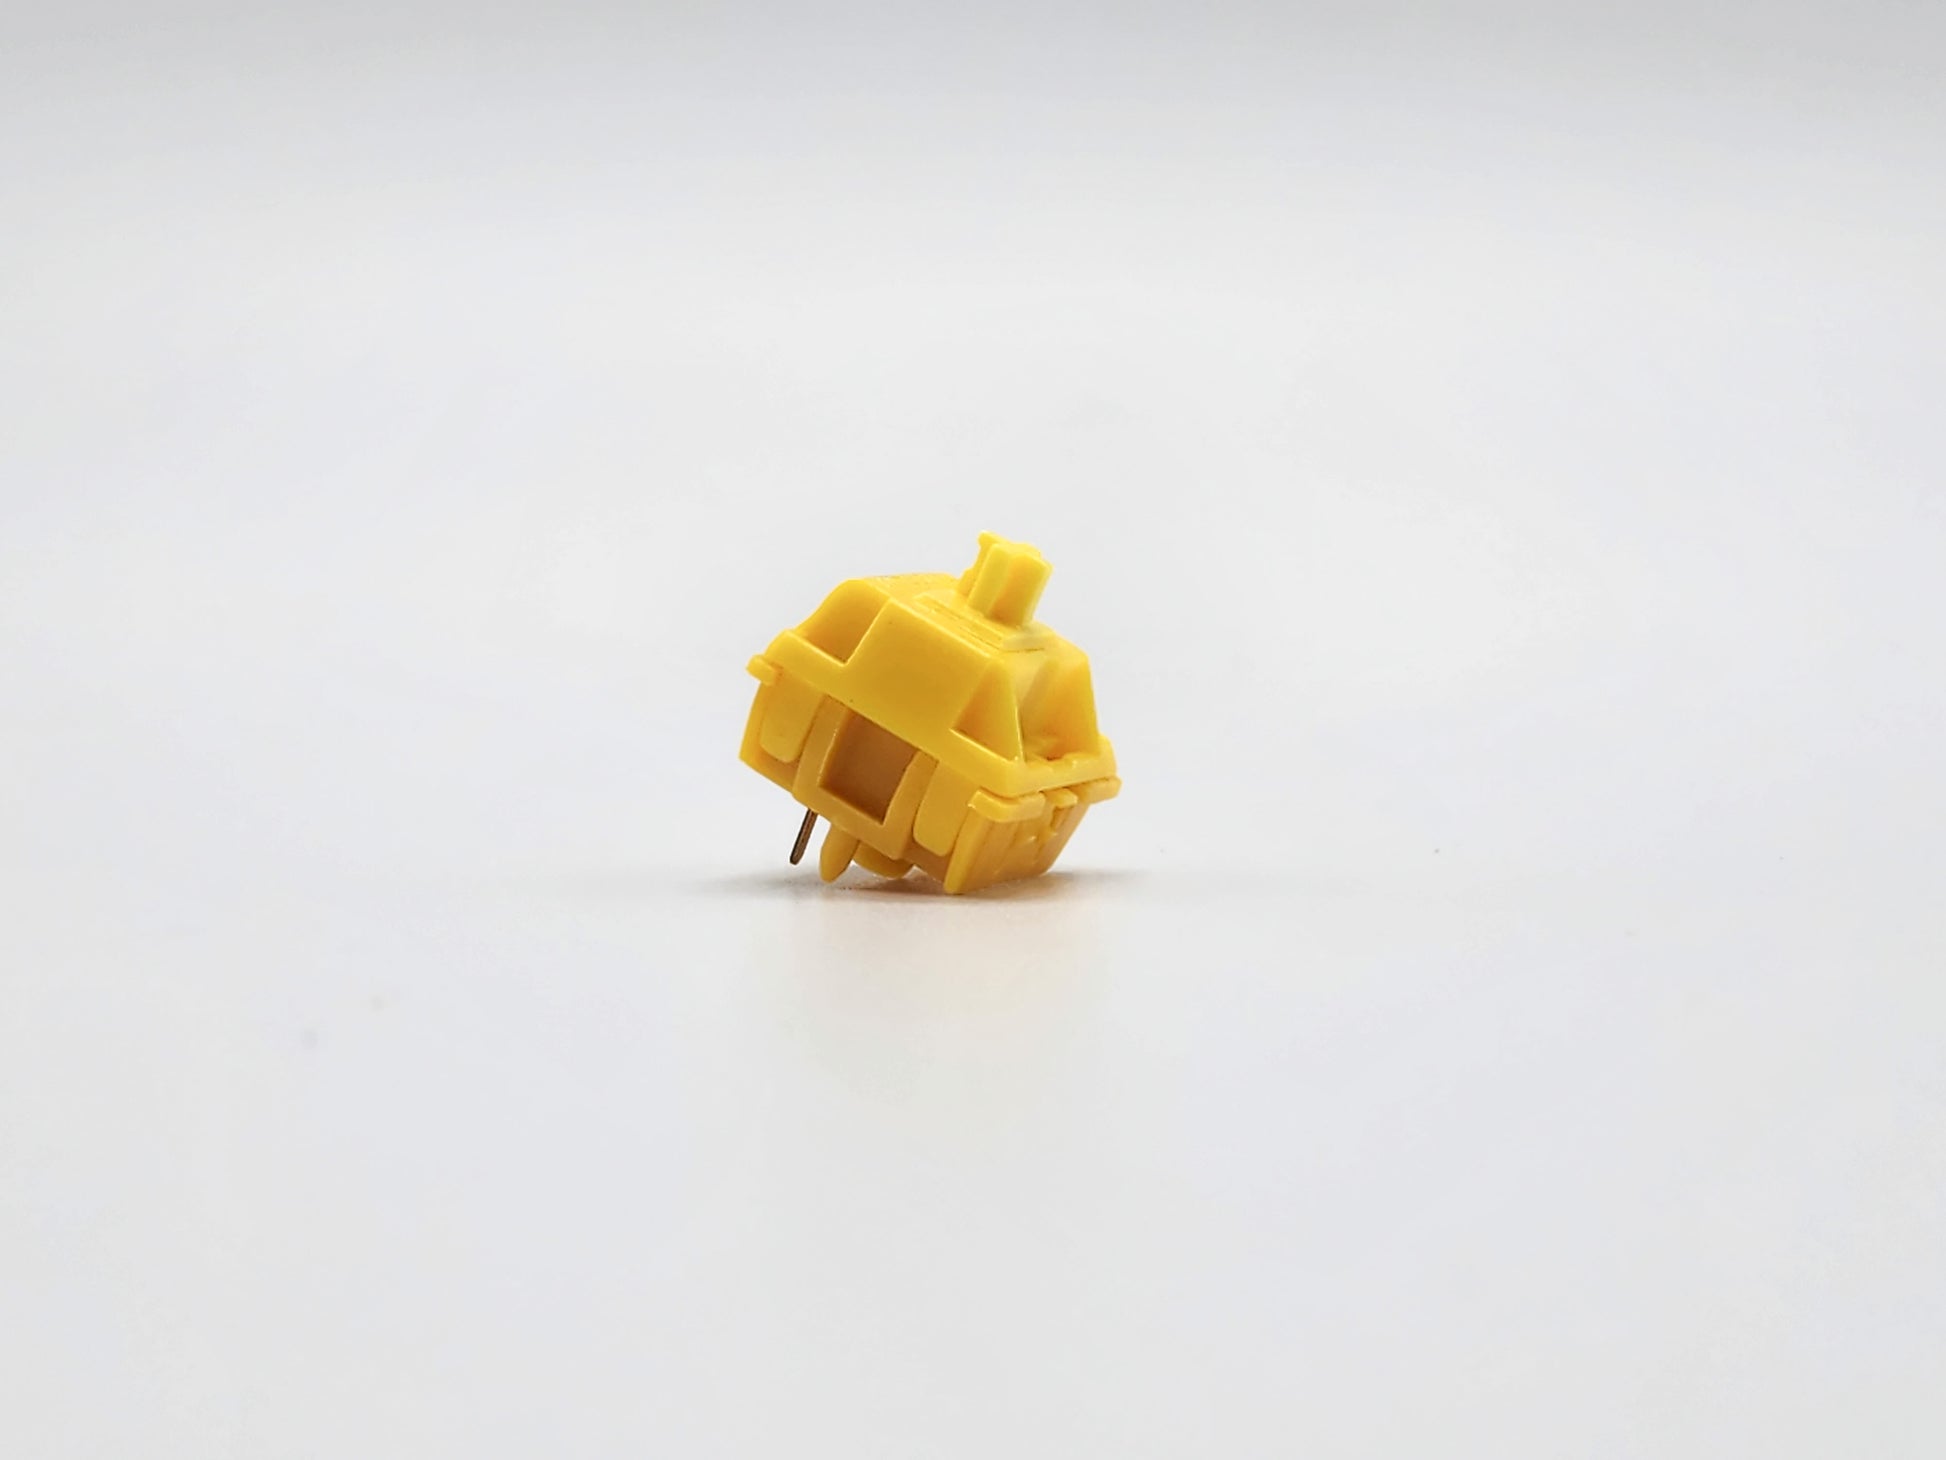 Gateron Cap V2 Golden Yellow Linear Switches